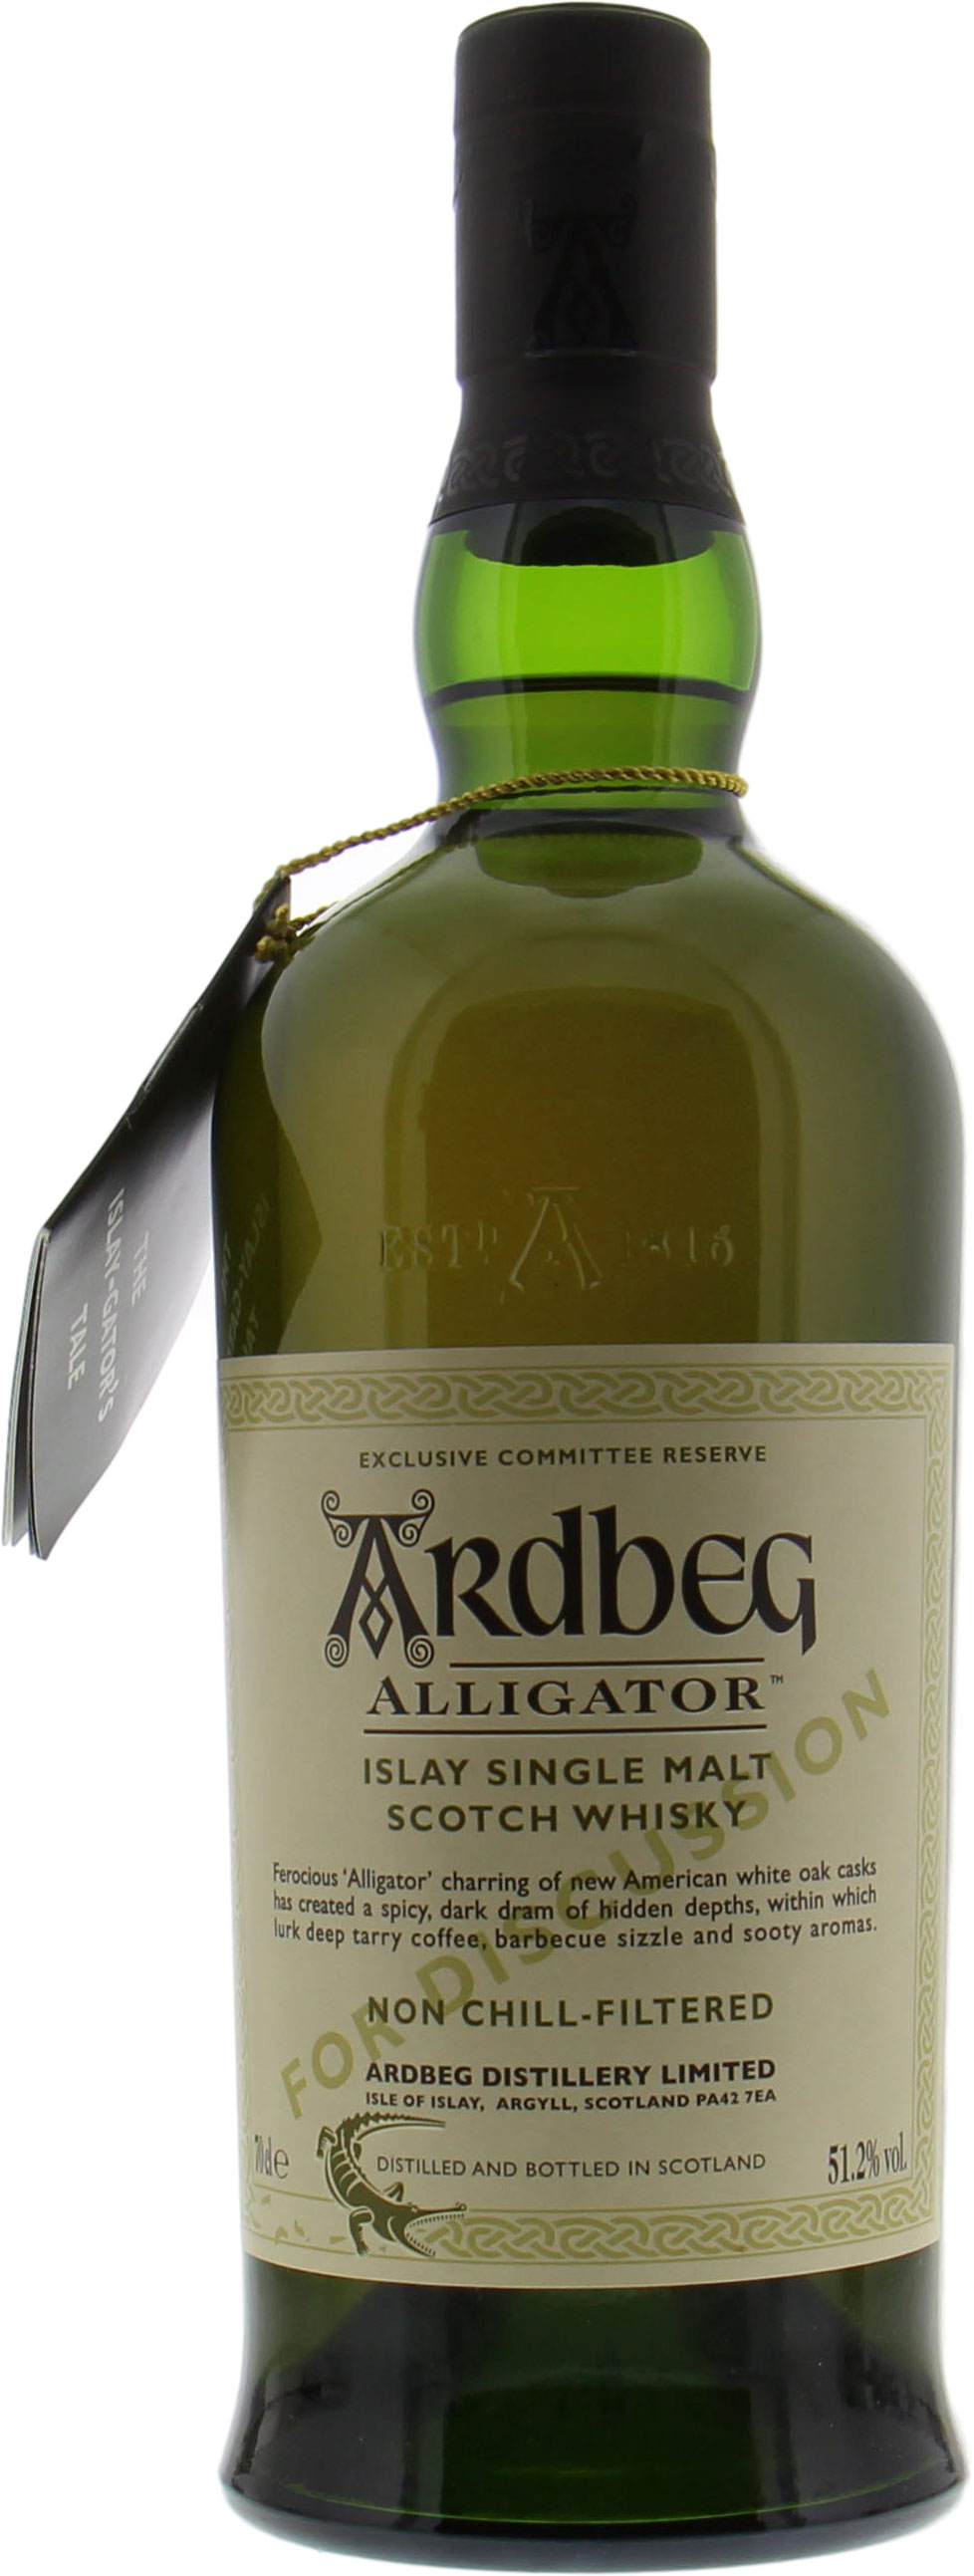 Ardbeg - Alligator Committee Reserve for Discussion 51.2% NV 10001